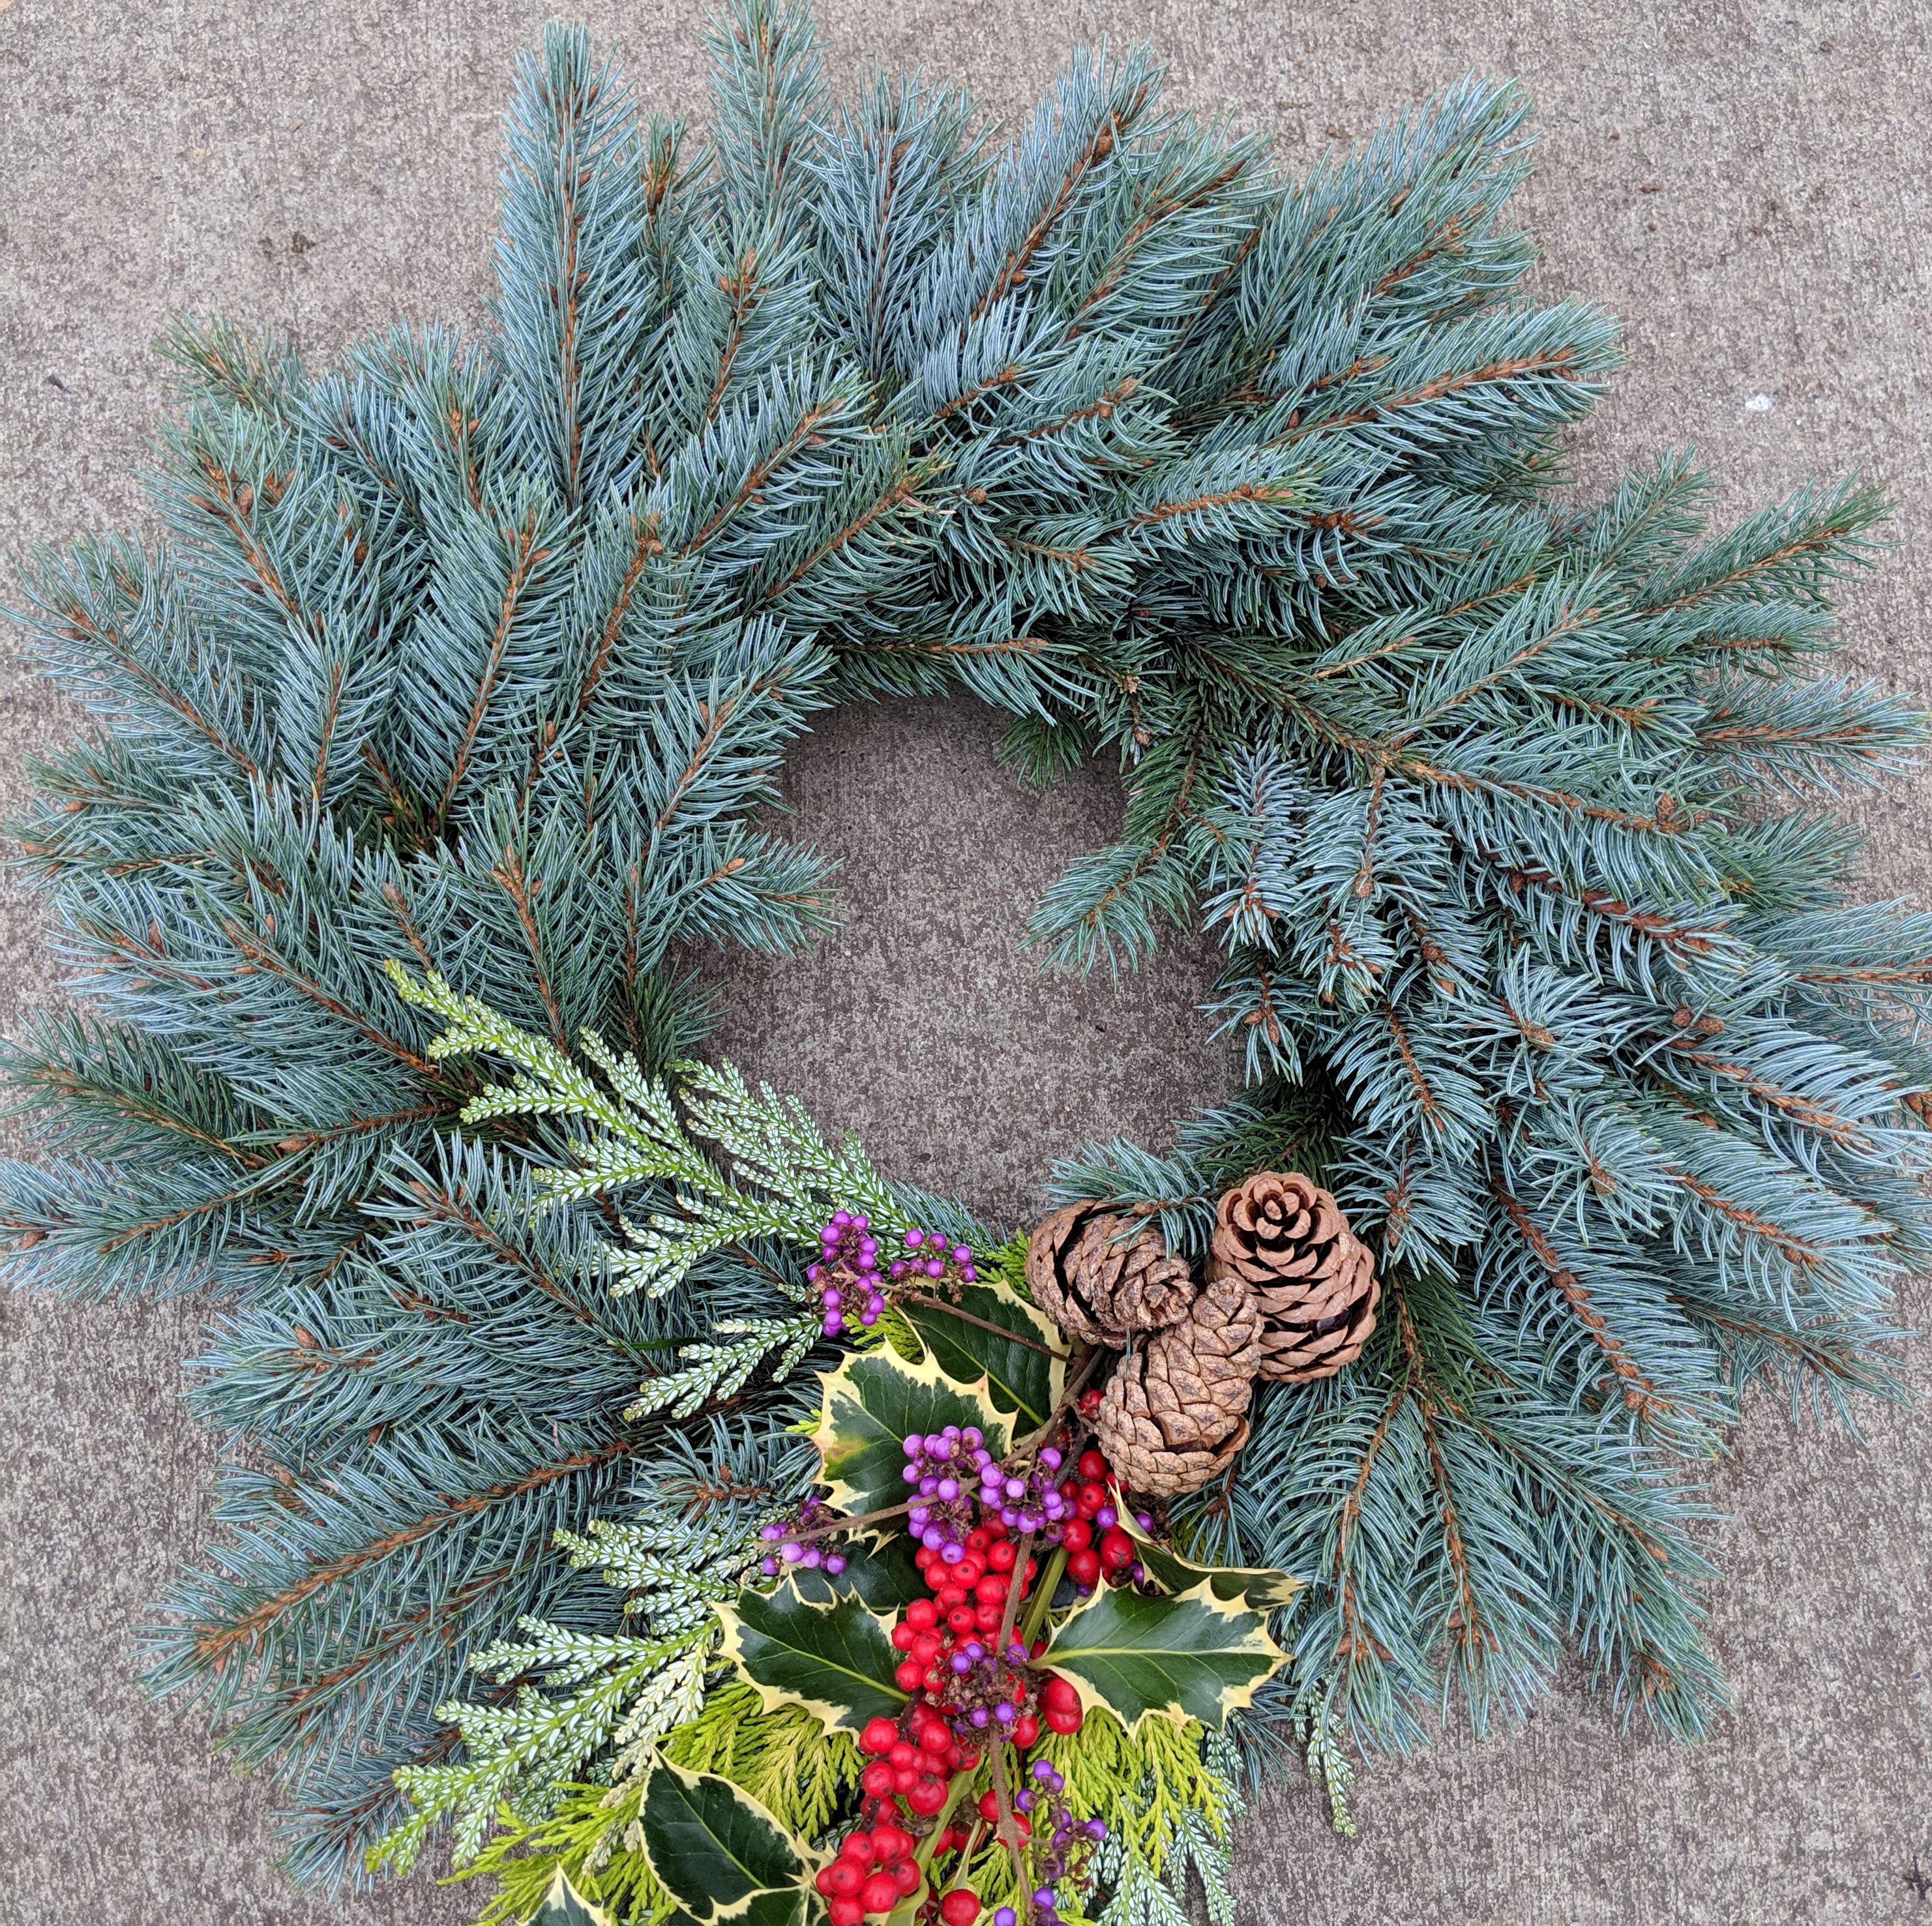 Wreaths, Greenery and Holiday Containers